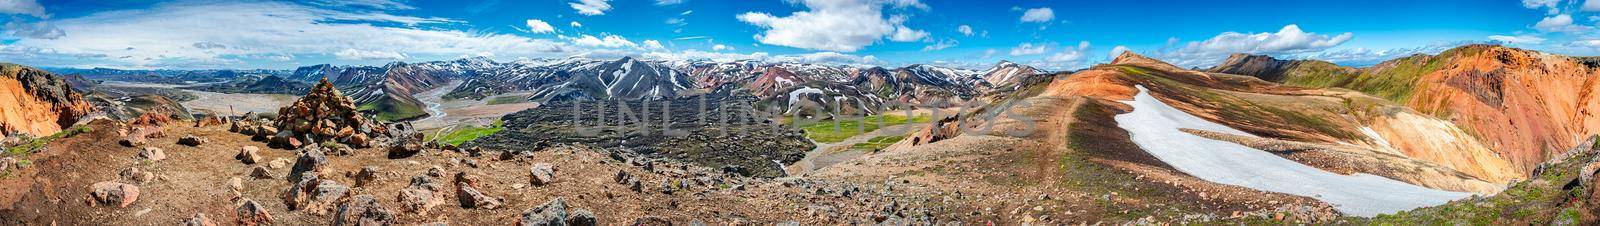 Panoramic 360 degrees landscape view of colorful rainbow volcanic Landmannalaugar mountains, volcanoes, lava fields and campsite at blue sky, Iceland, summer